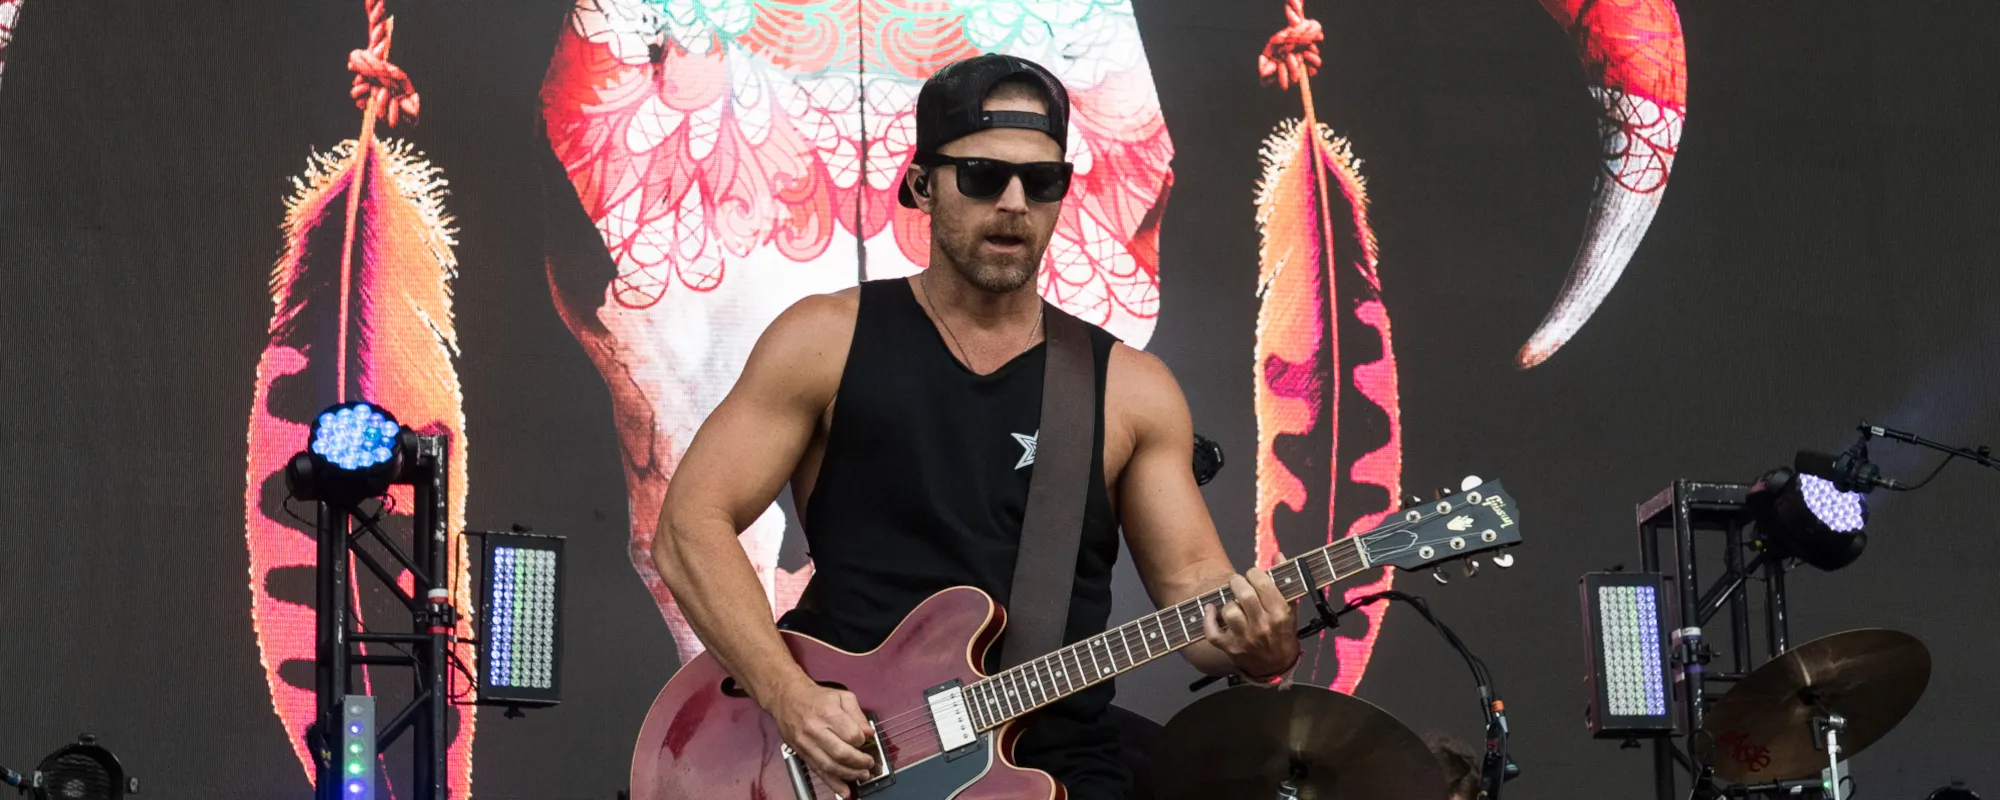 Meaning Behind Kip Moore’s Feel-Good Country Song “Somethin’ ’Bout a Truck”